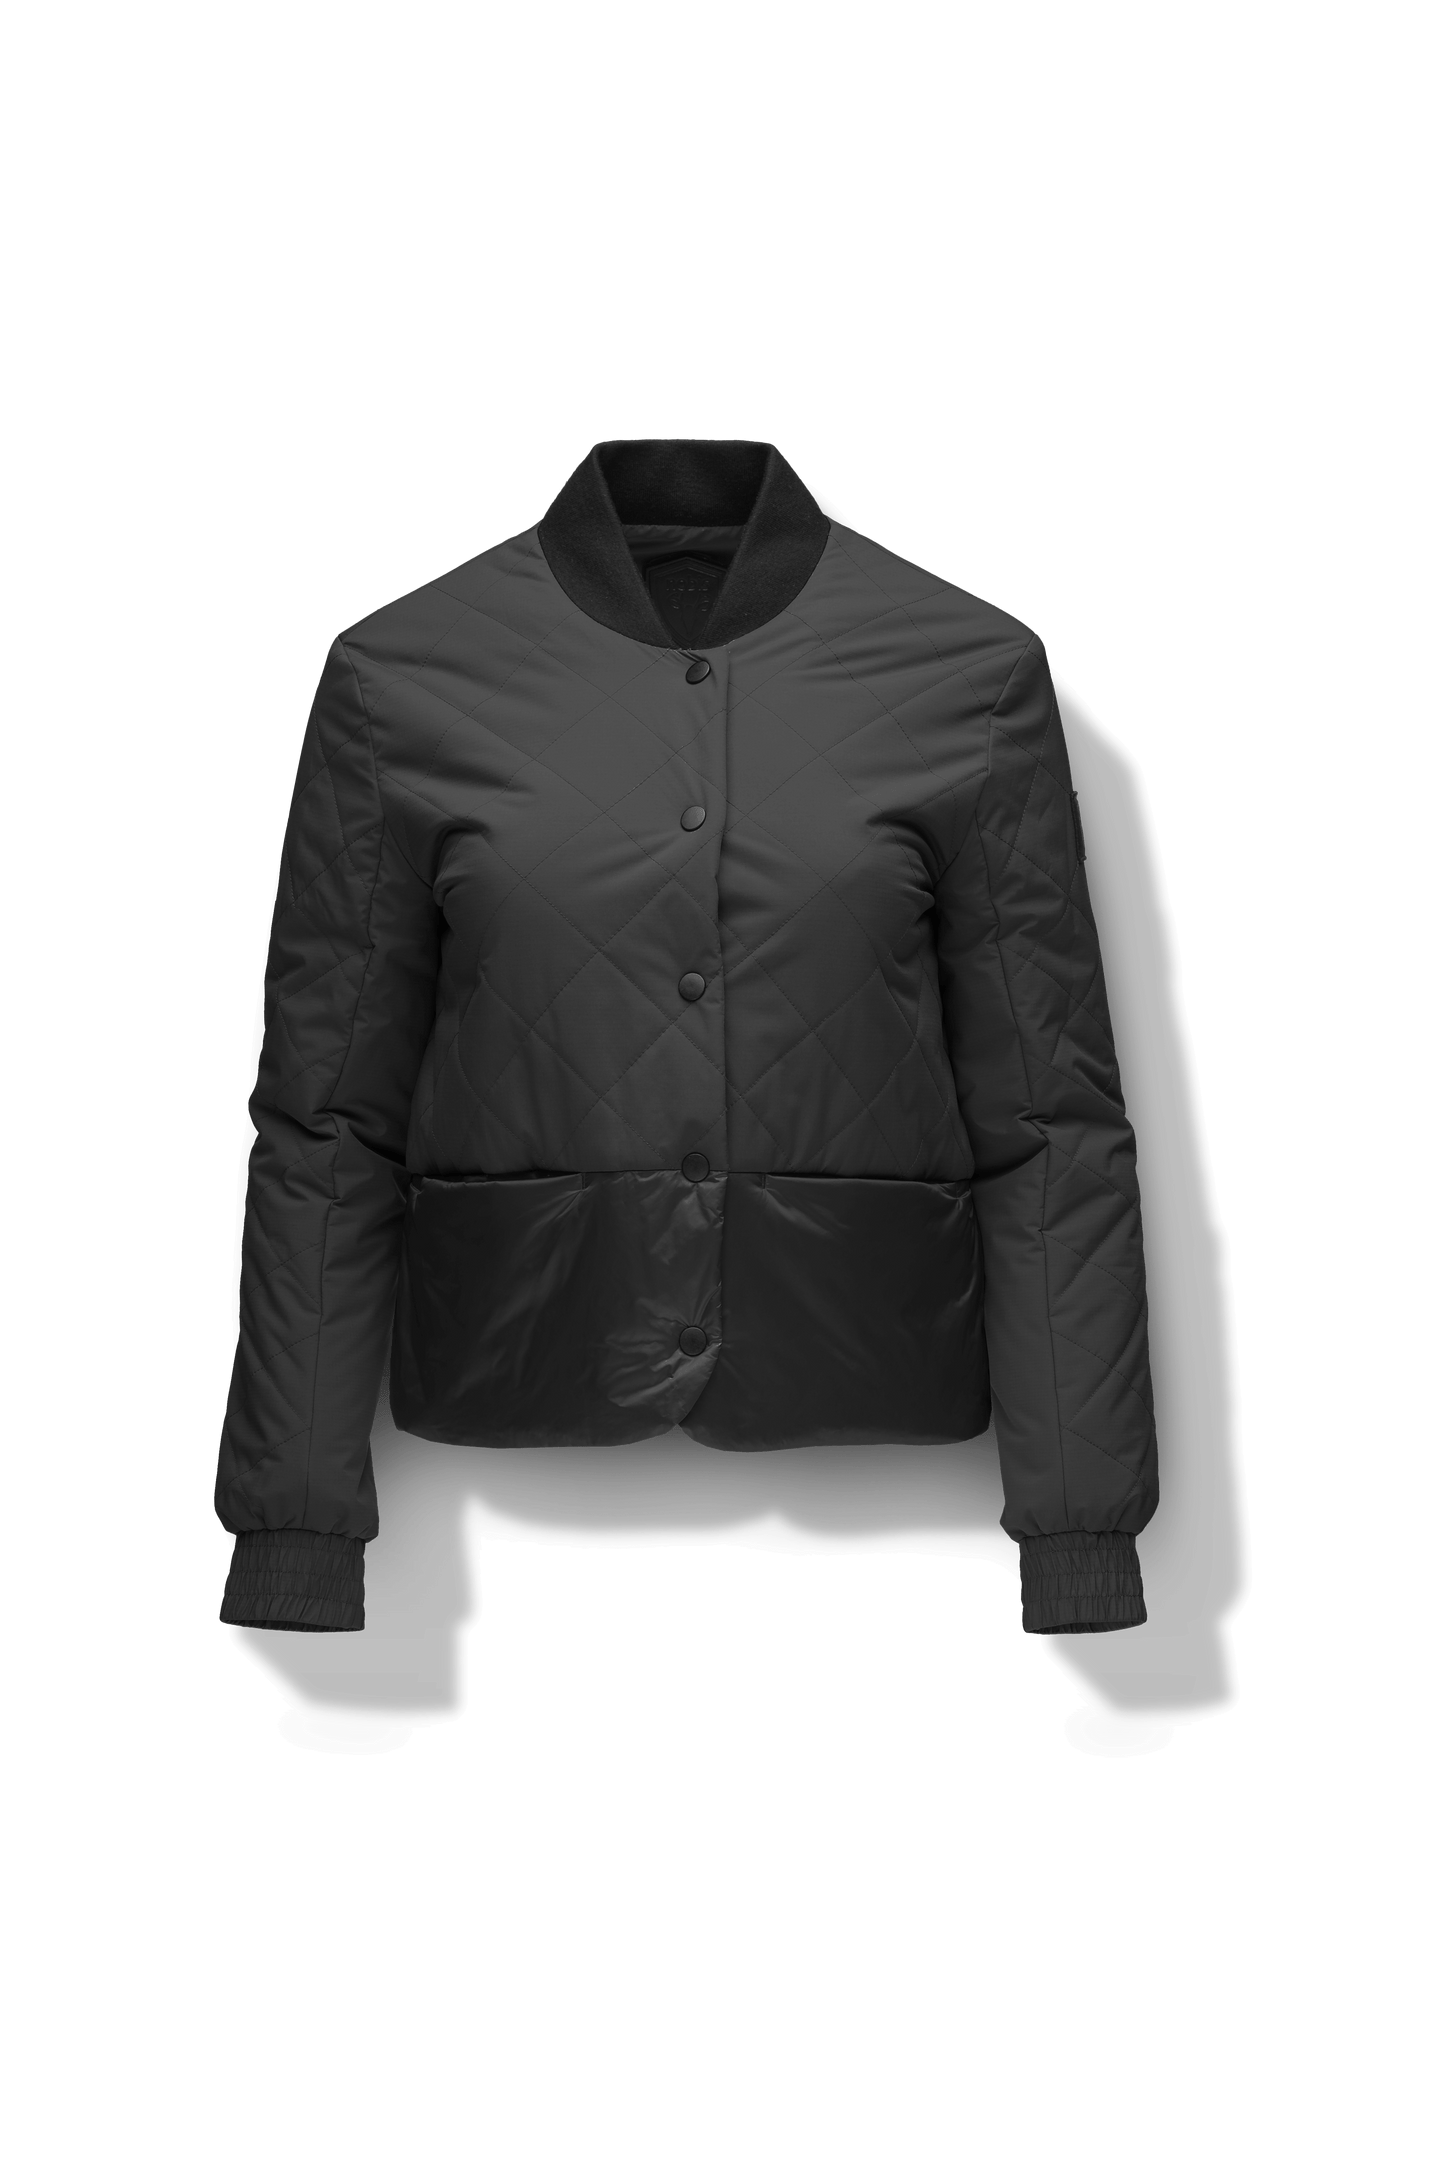 Lexi Women's Reversible Midlayer Jacket in waist length, premium stretch ripstop and contrast cire technical nylon taffeta fabrication, premium 4-way stretch, water resistant Primaloft Gold Insulation Active+, snap button closure at centre front, exterior magnetic closure pockets at sides, elasticized cuff details, and reversible from a quilted or smooth outer shell, in Black